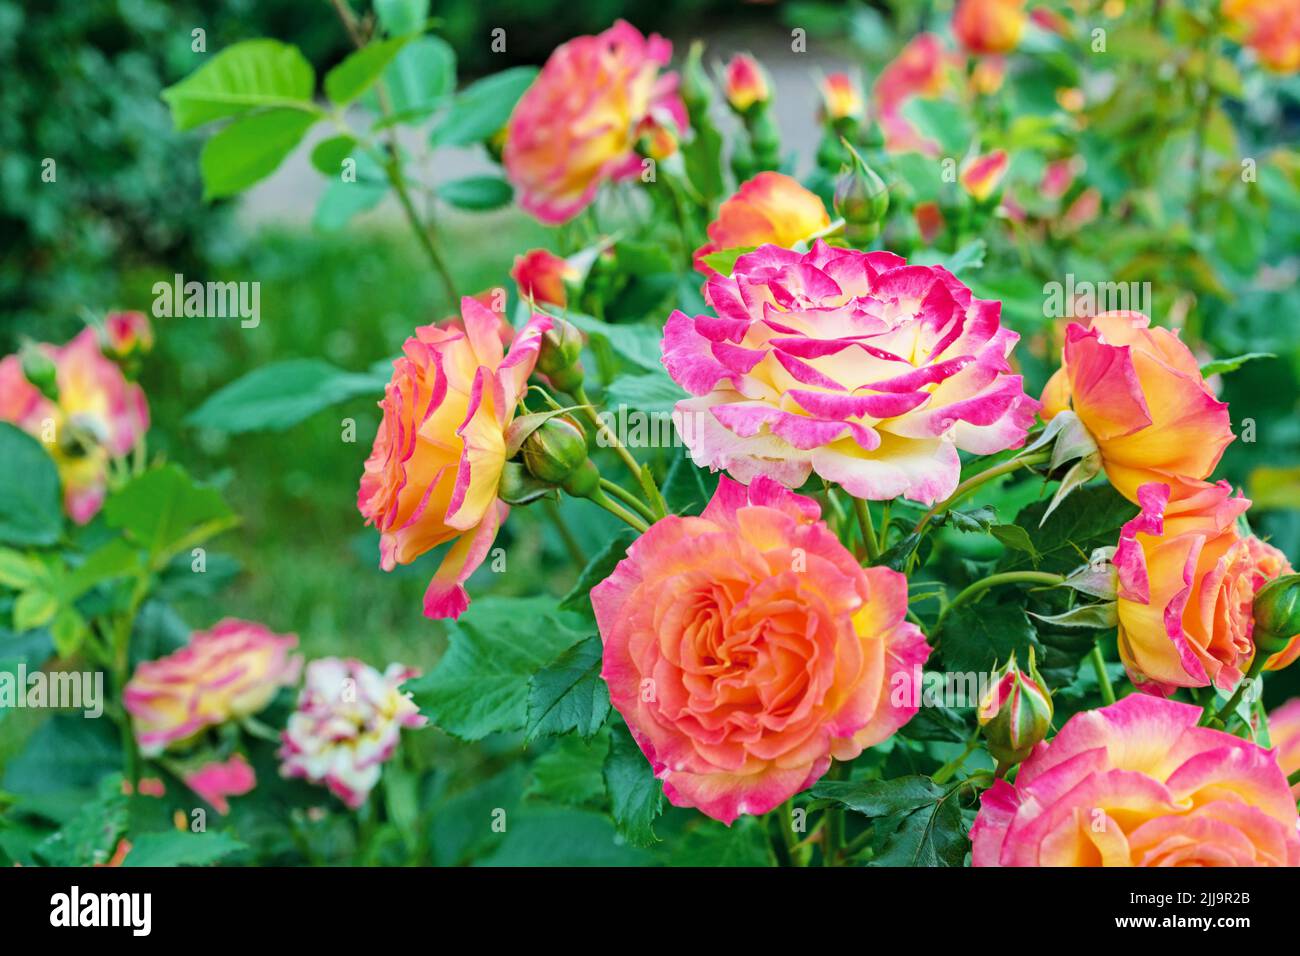 Pink rose with a white center surrounded by orange roses. Stock Photo